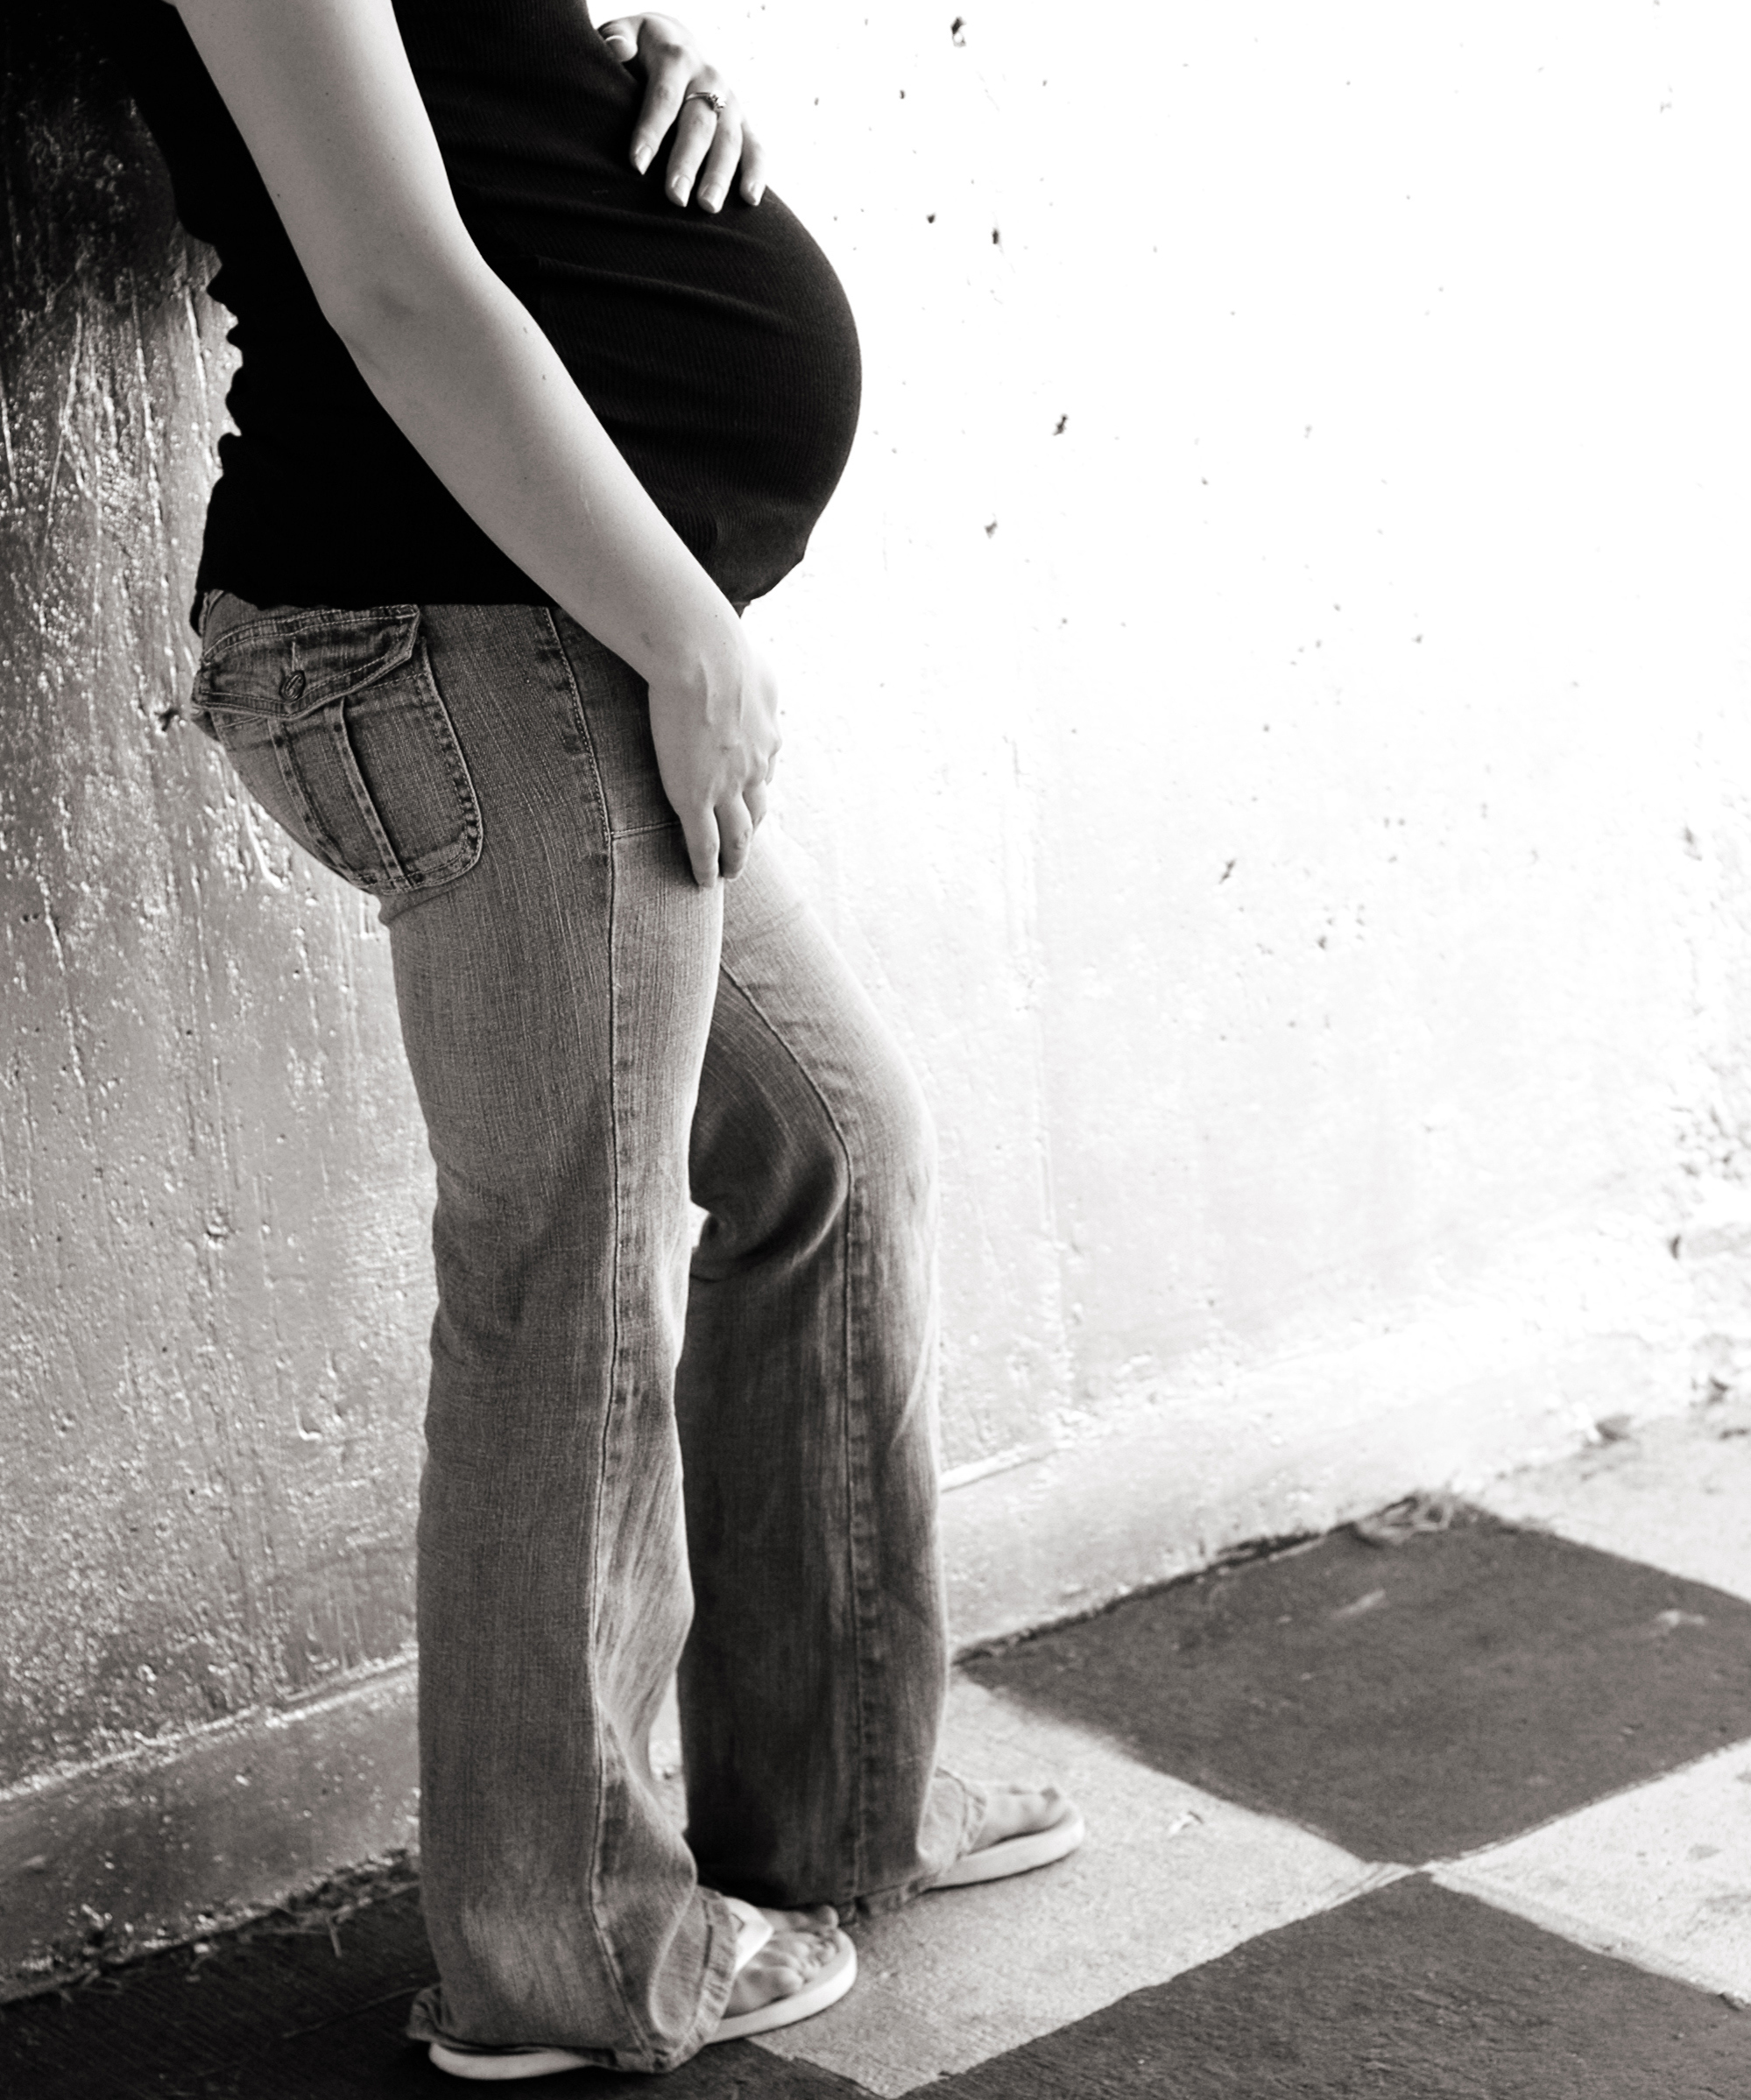 The role of sexual identity and attraction in teen pregnancy